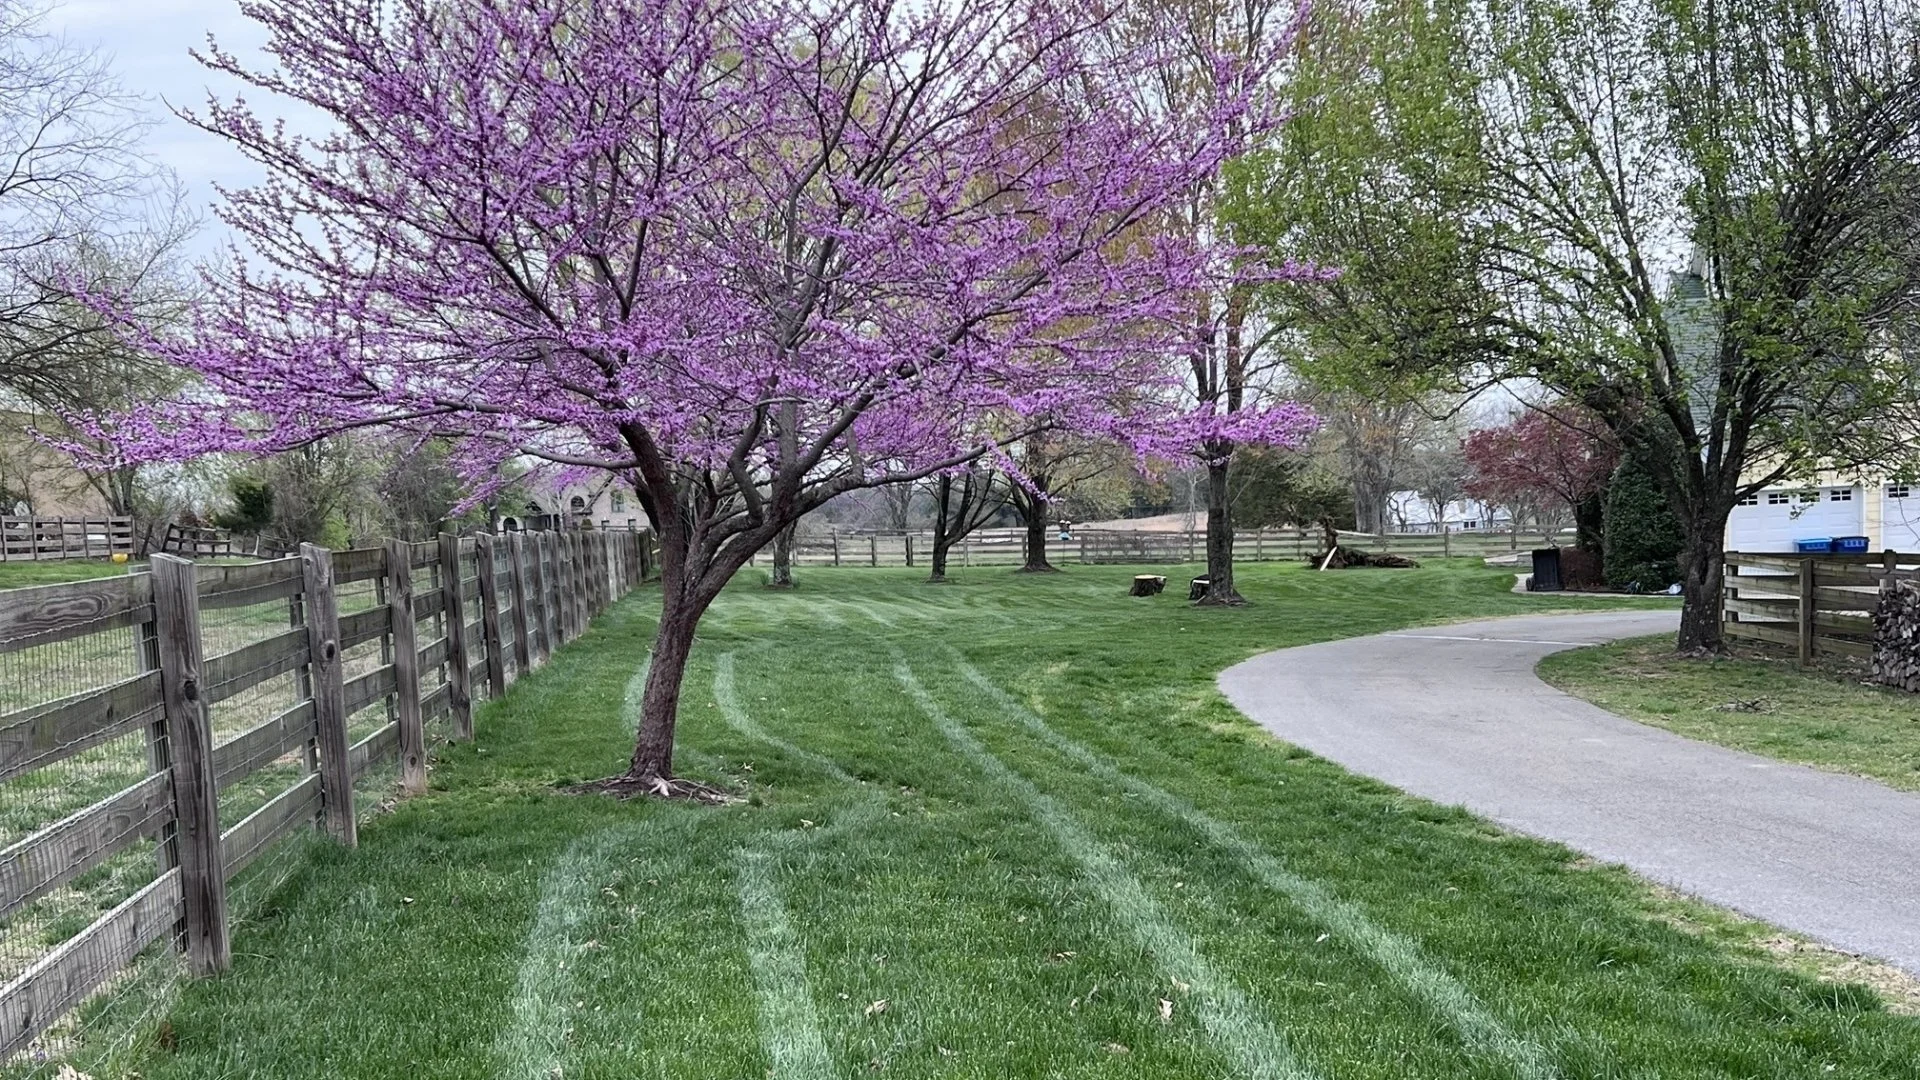 How Many Times Do You Need to Fertilize Your Cool-Season Lawn in the Spring?